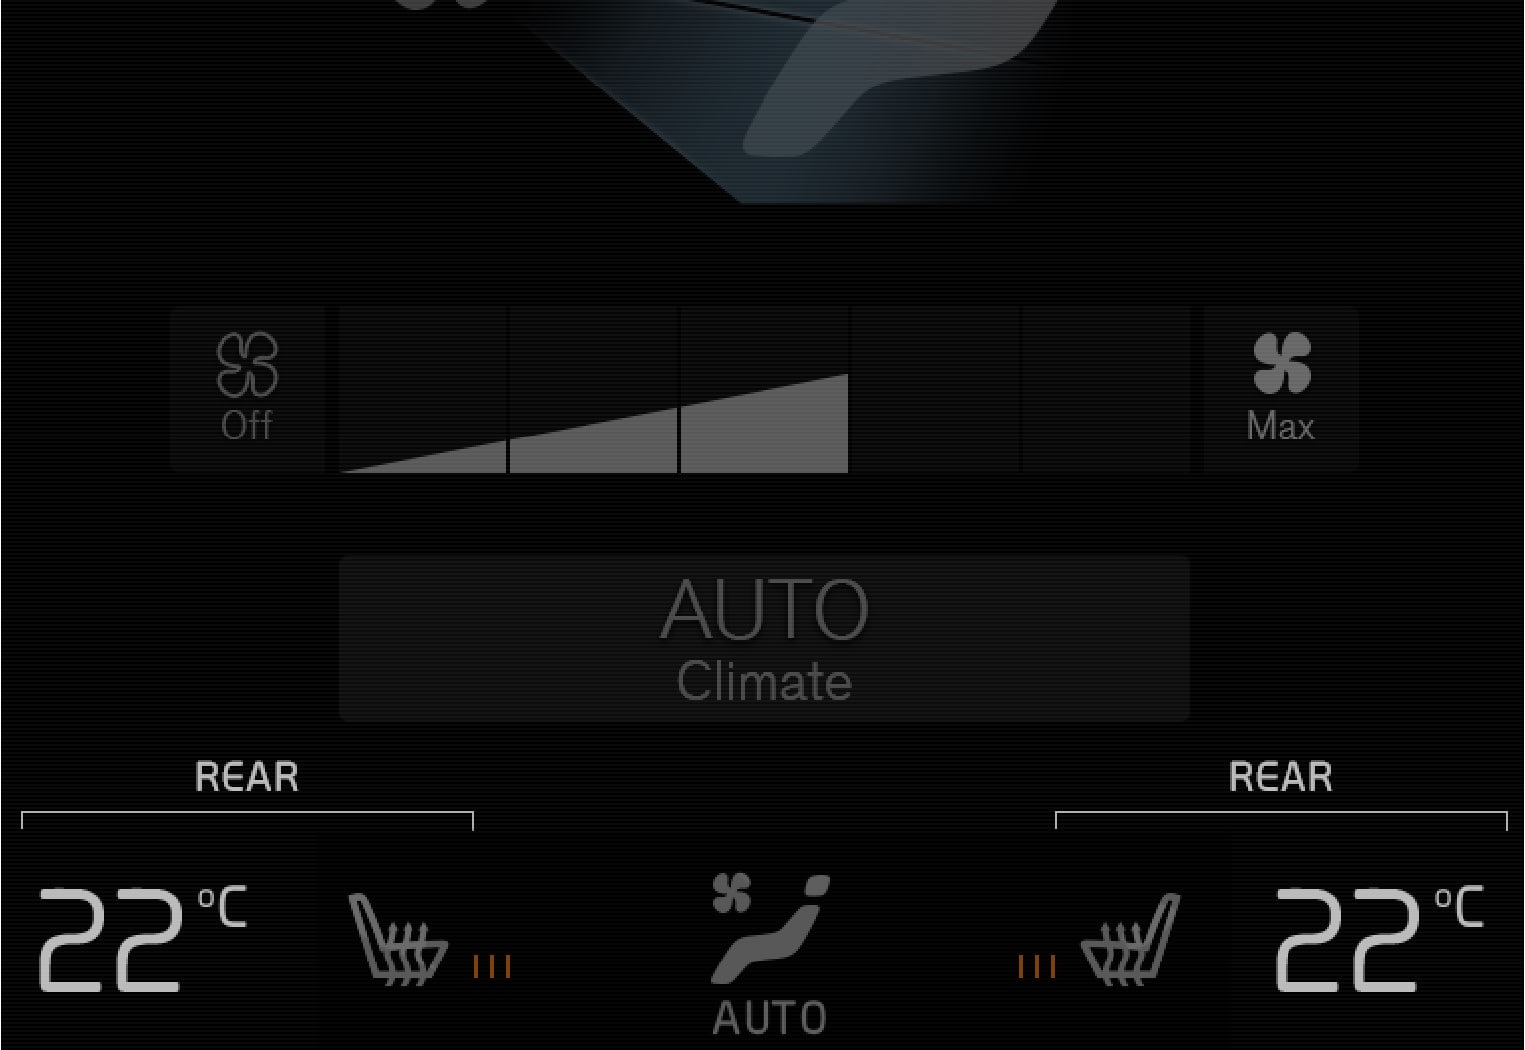 Temperature buttons in the Rear climate tab in the climate view.